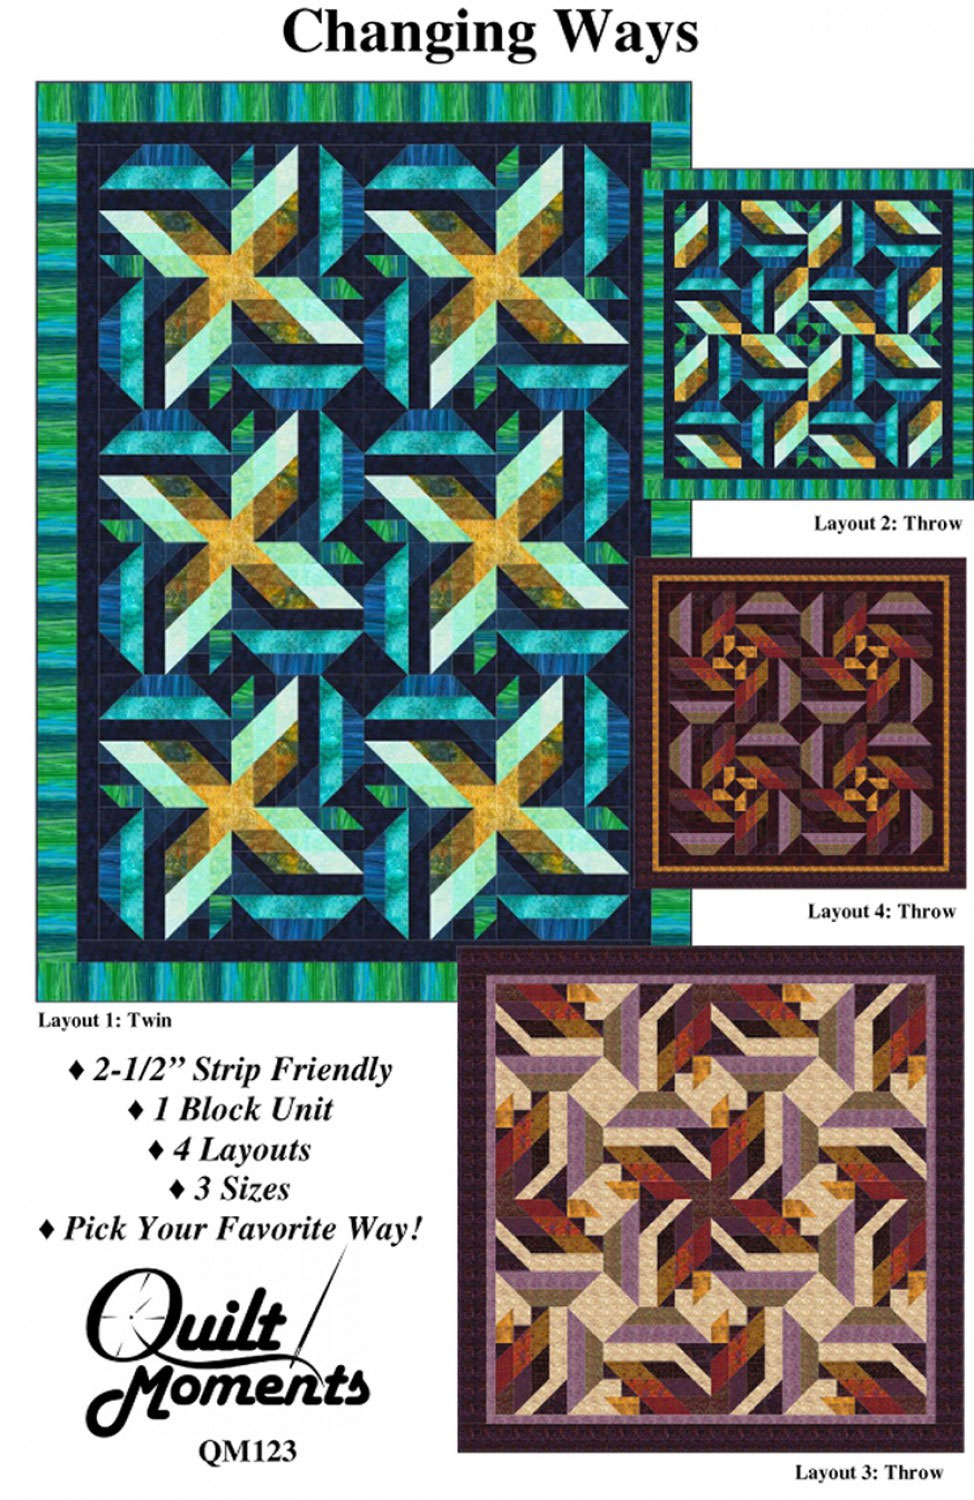 Changing-Ways-sewing-pattern-Marilyn-Foreman-Quilt-Moments-front